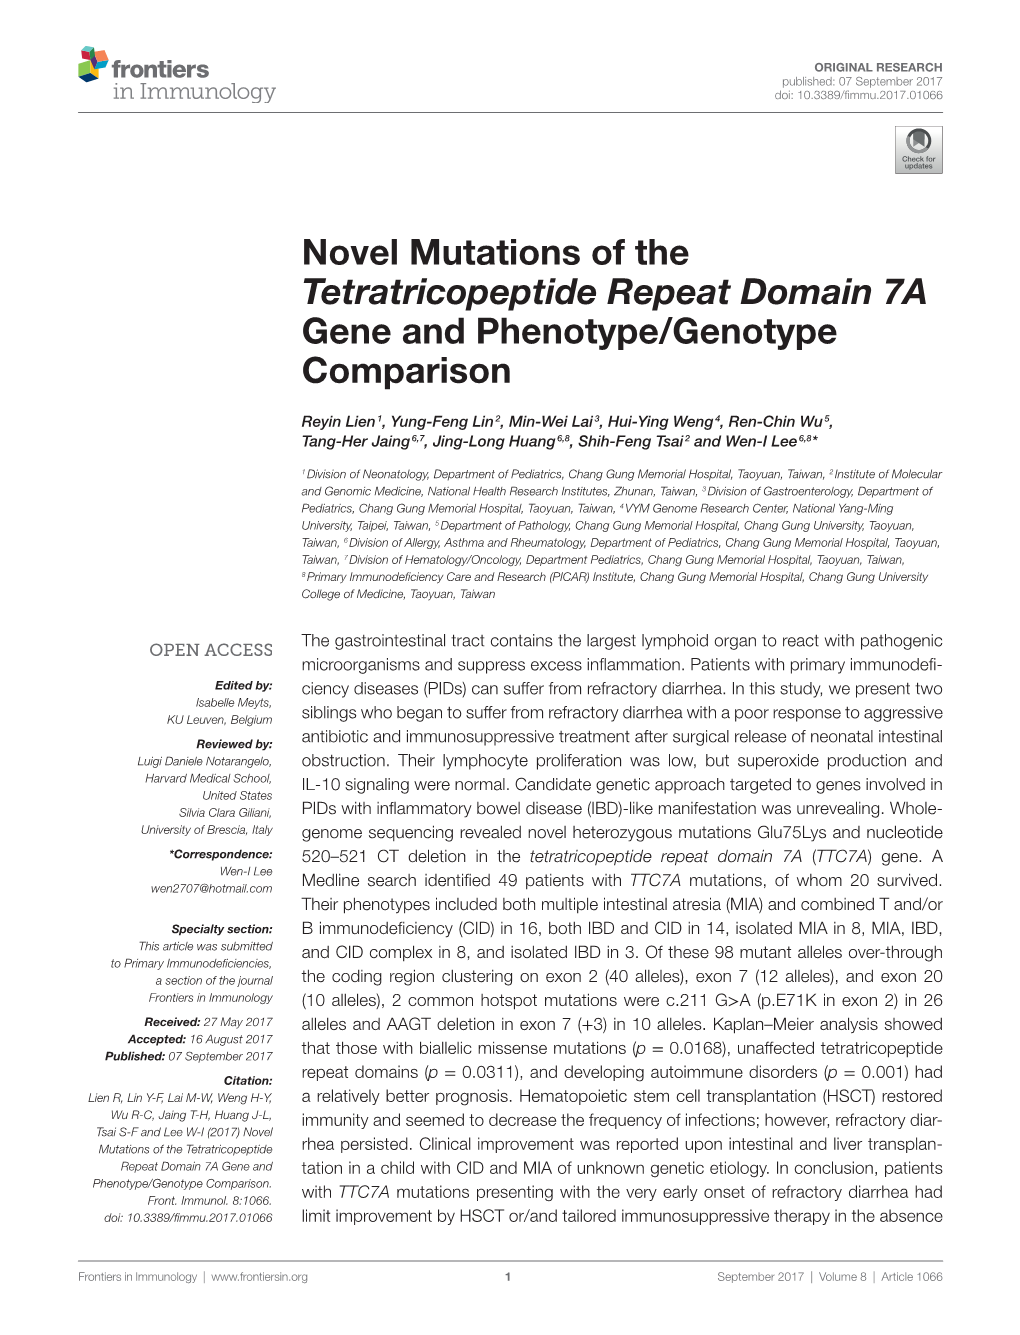 Novel Mutations of the Tetratricopeptide Repeat Domain 7A Gene and Phenotype/Genotype Comparison